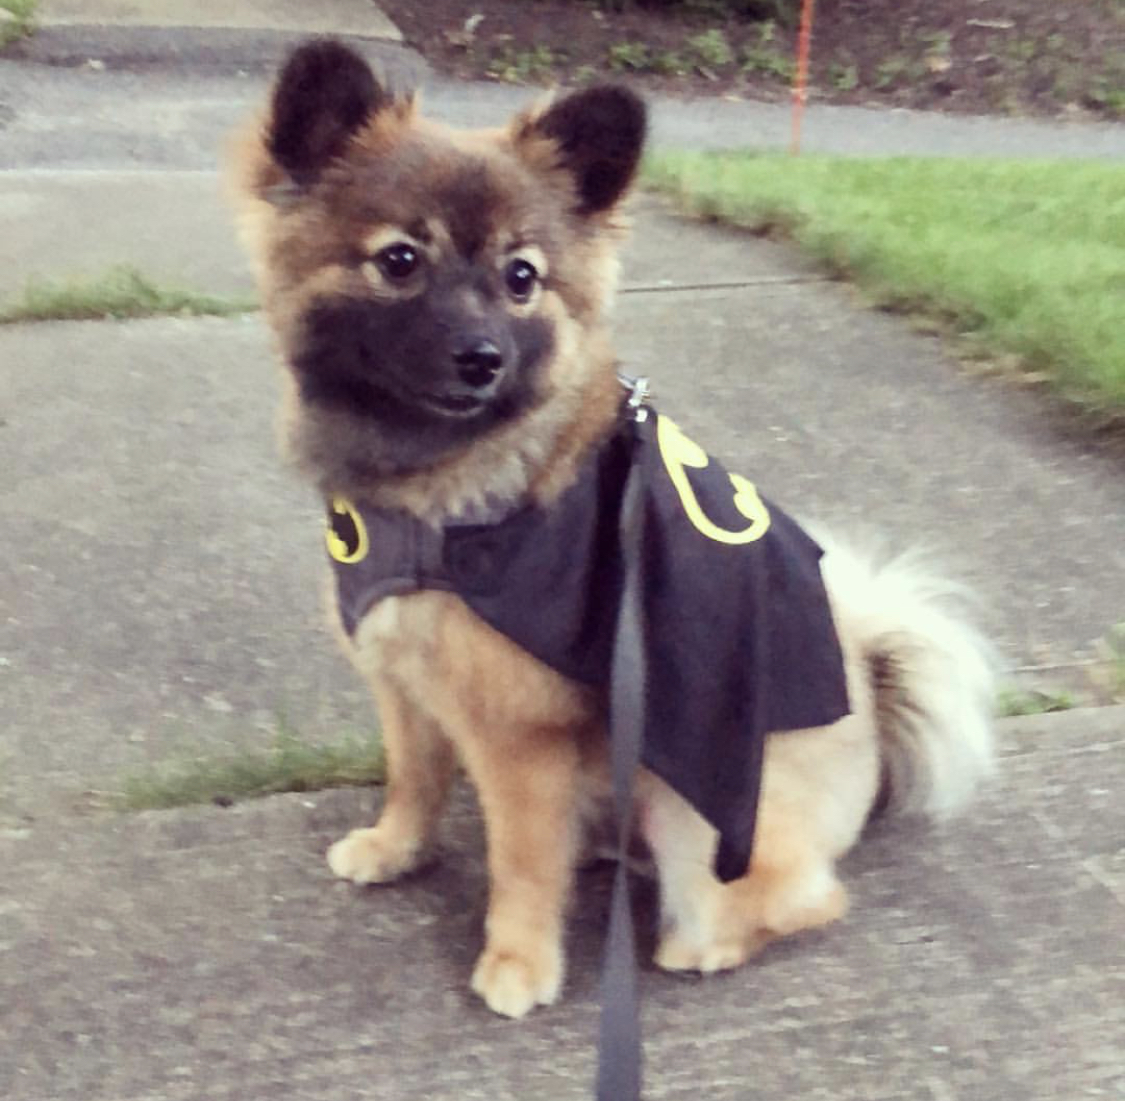 Pom Shepherd wearing a batman costume while sitting on the concrete pathway